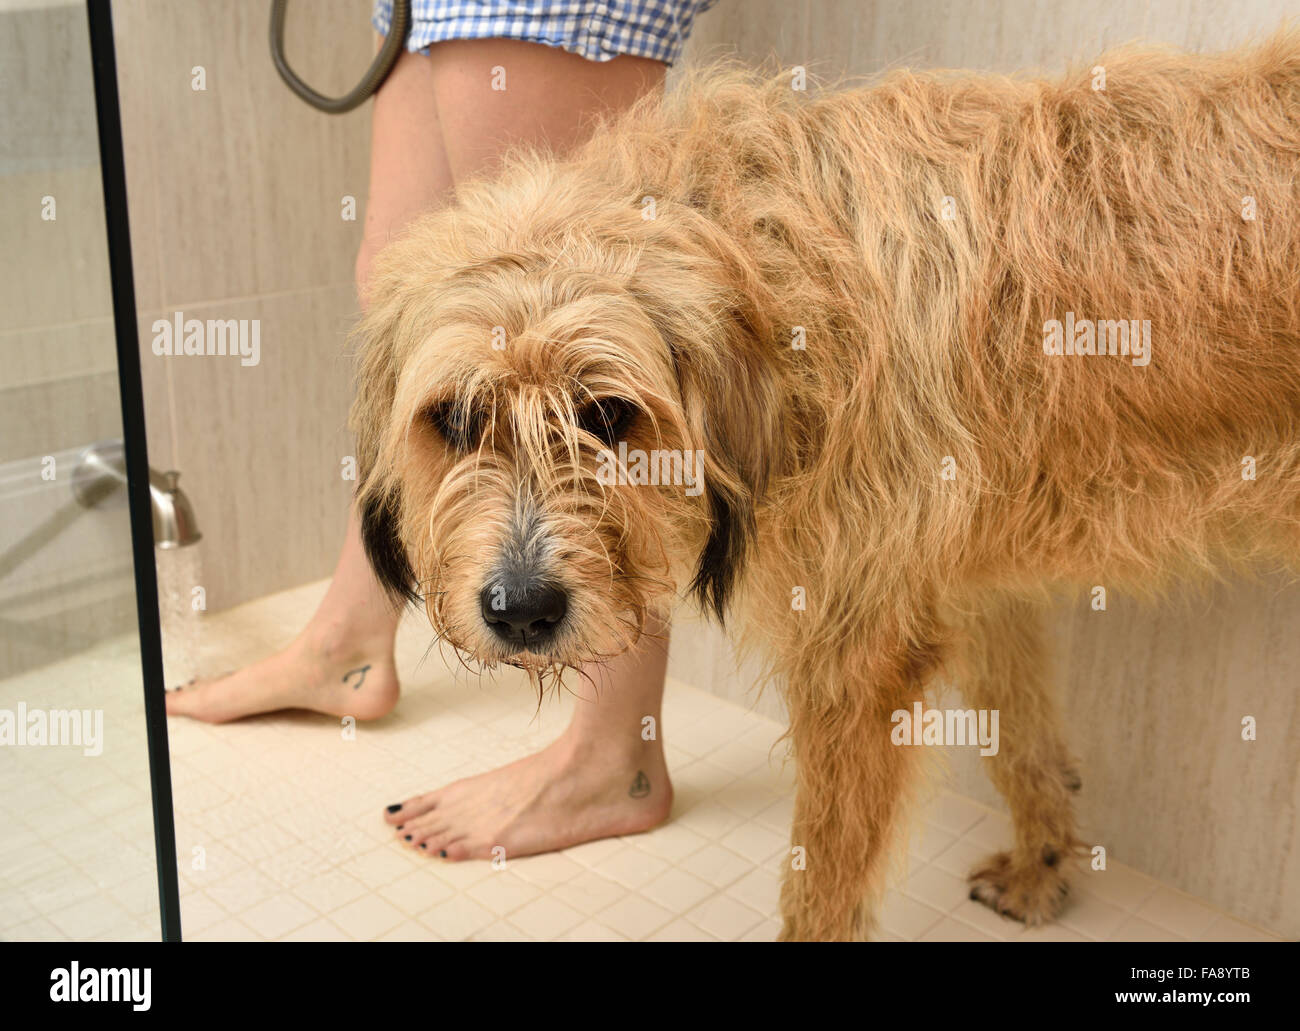 Dry worried dog in shower stall waiting for warm water for a wash Stock Photo